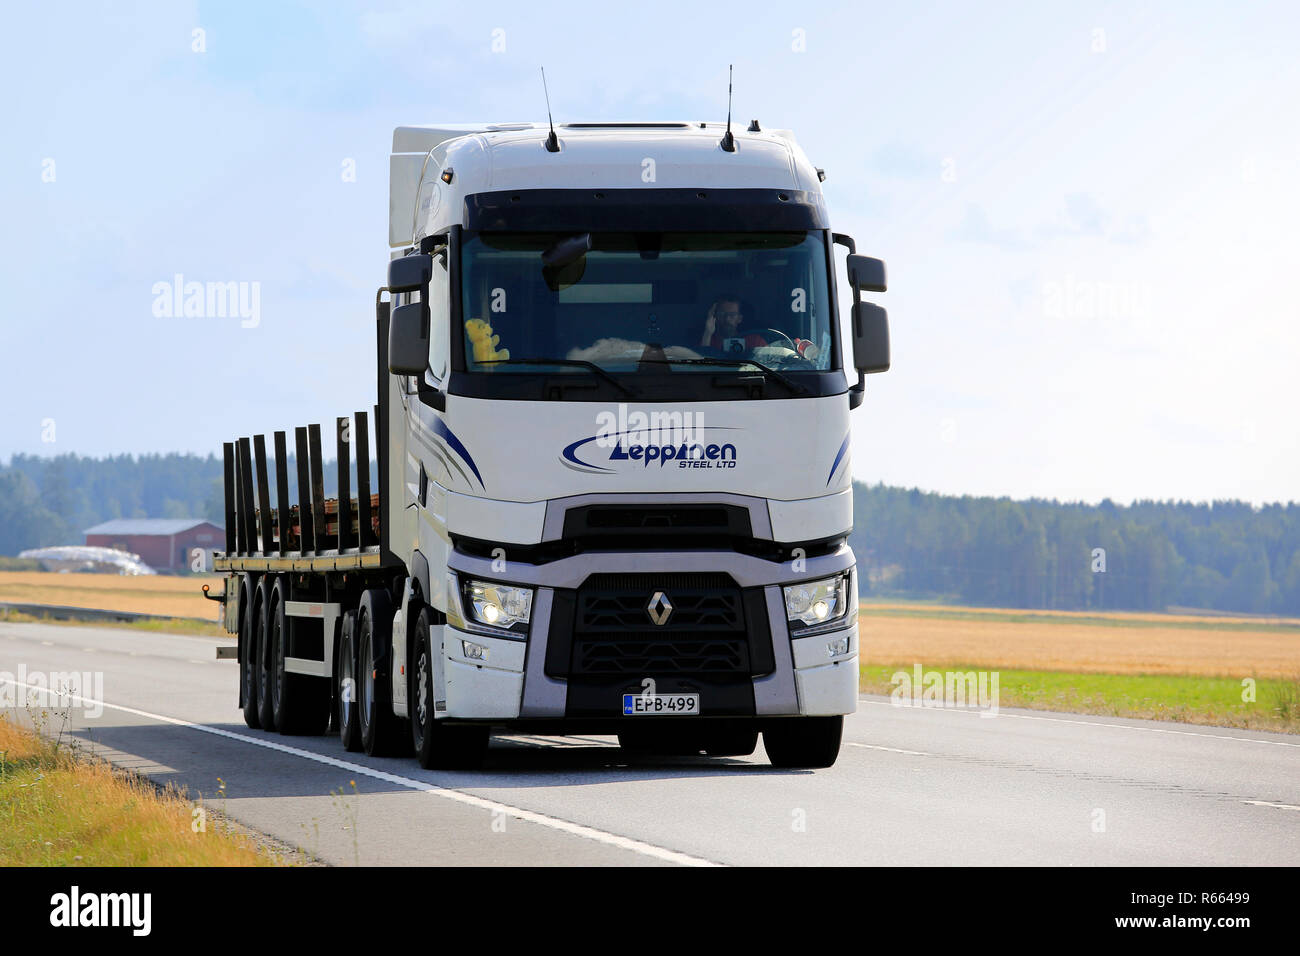 Luopajarvi, Finland - August 9, 2018: White Renault Trucks T semi trailer of  Leppinen Steel Ltd transports a load along highway on a day of summer. Stock Photo